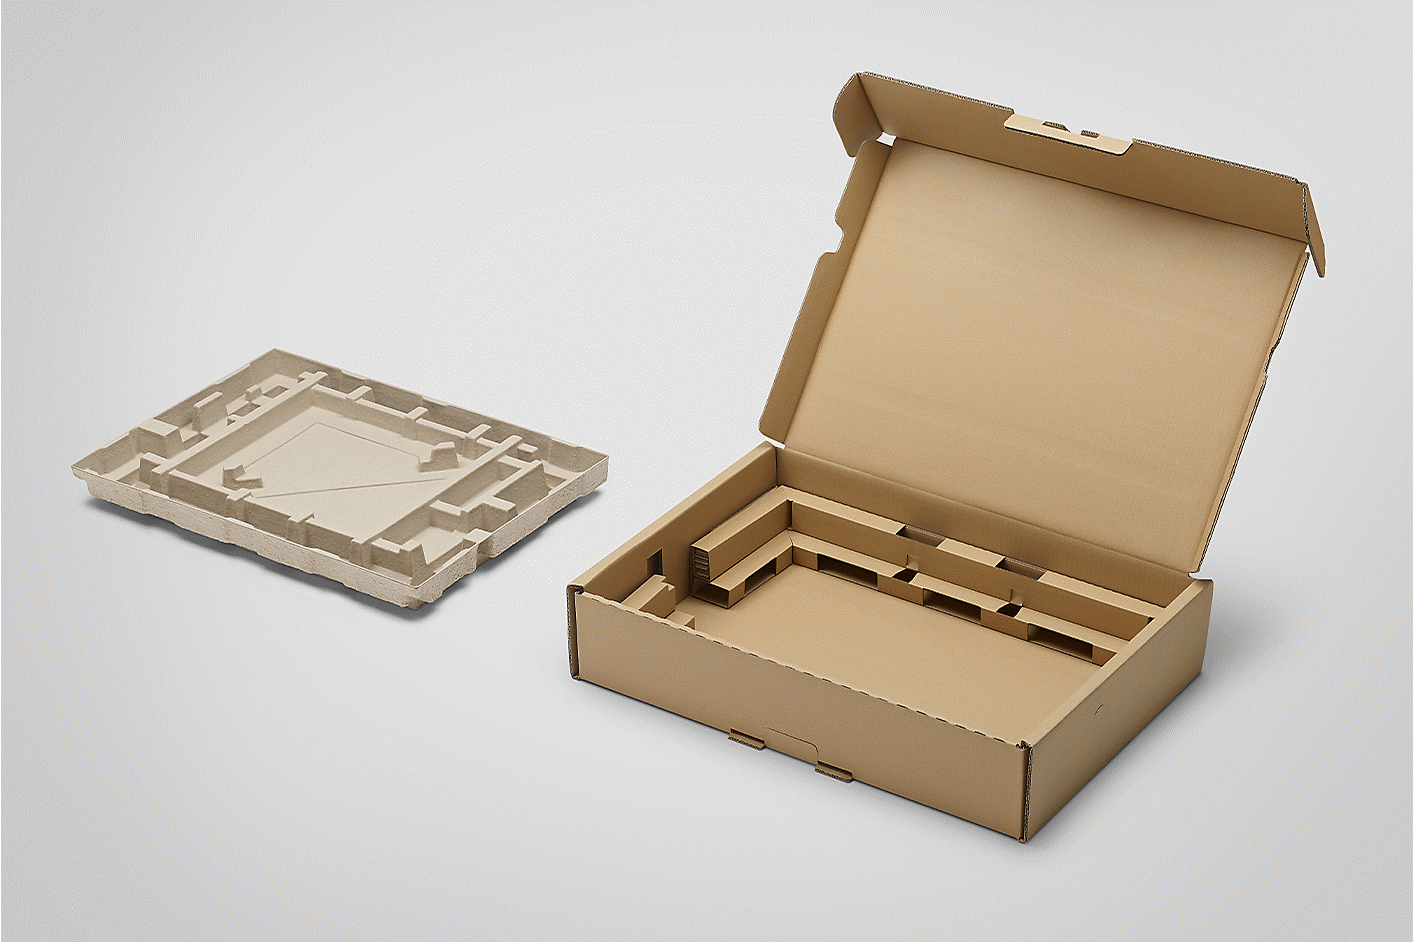 Image of cardboard package and pulp mould inner cushion side by side